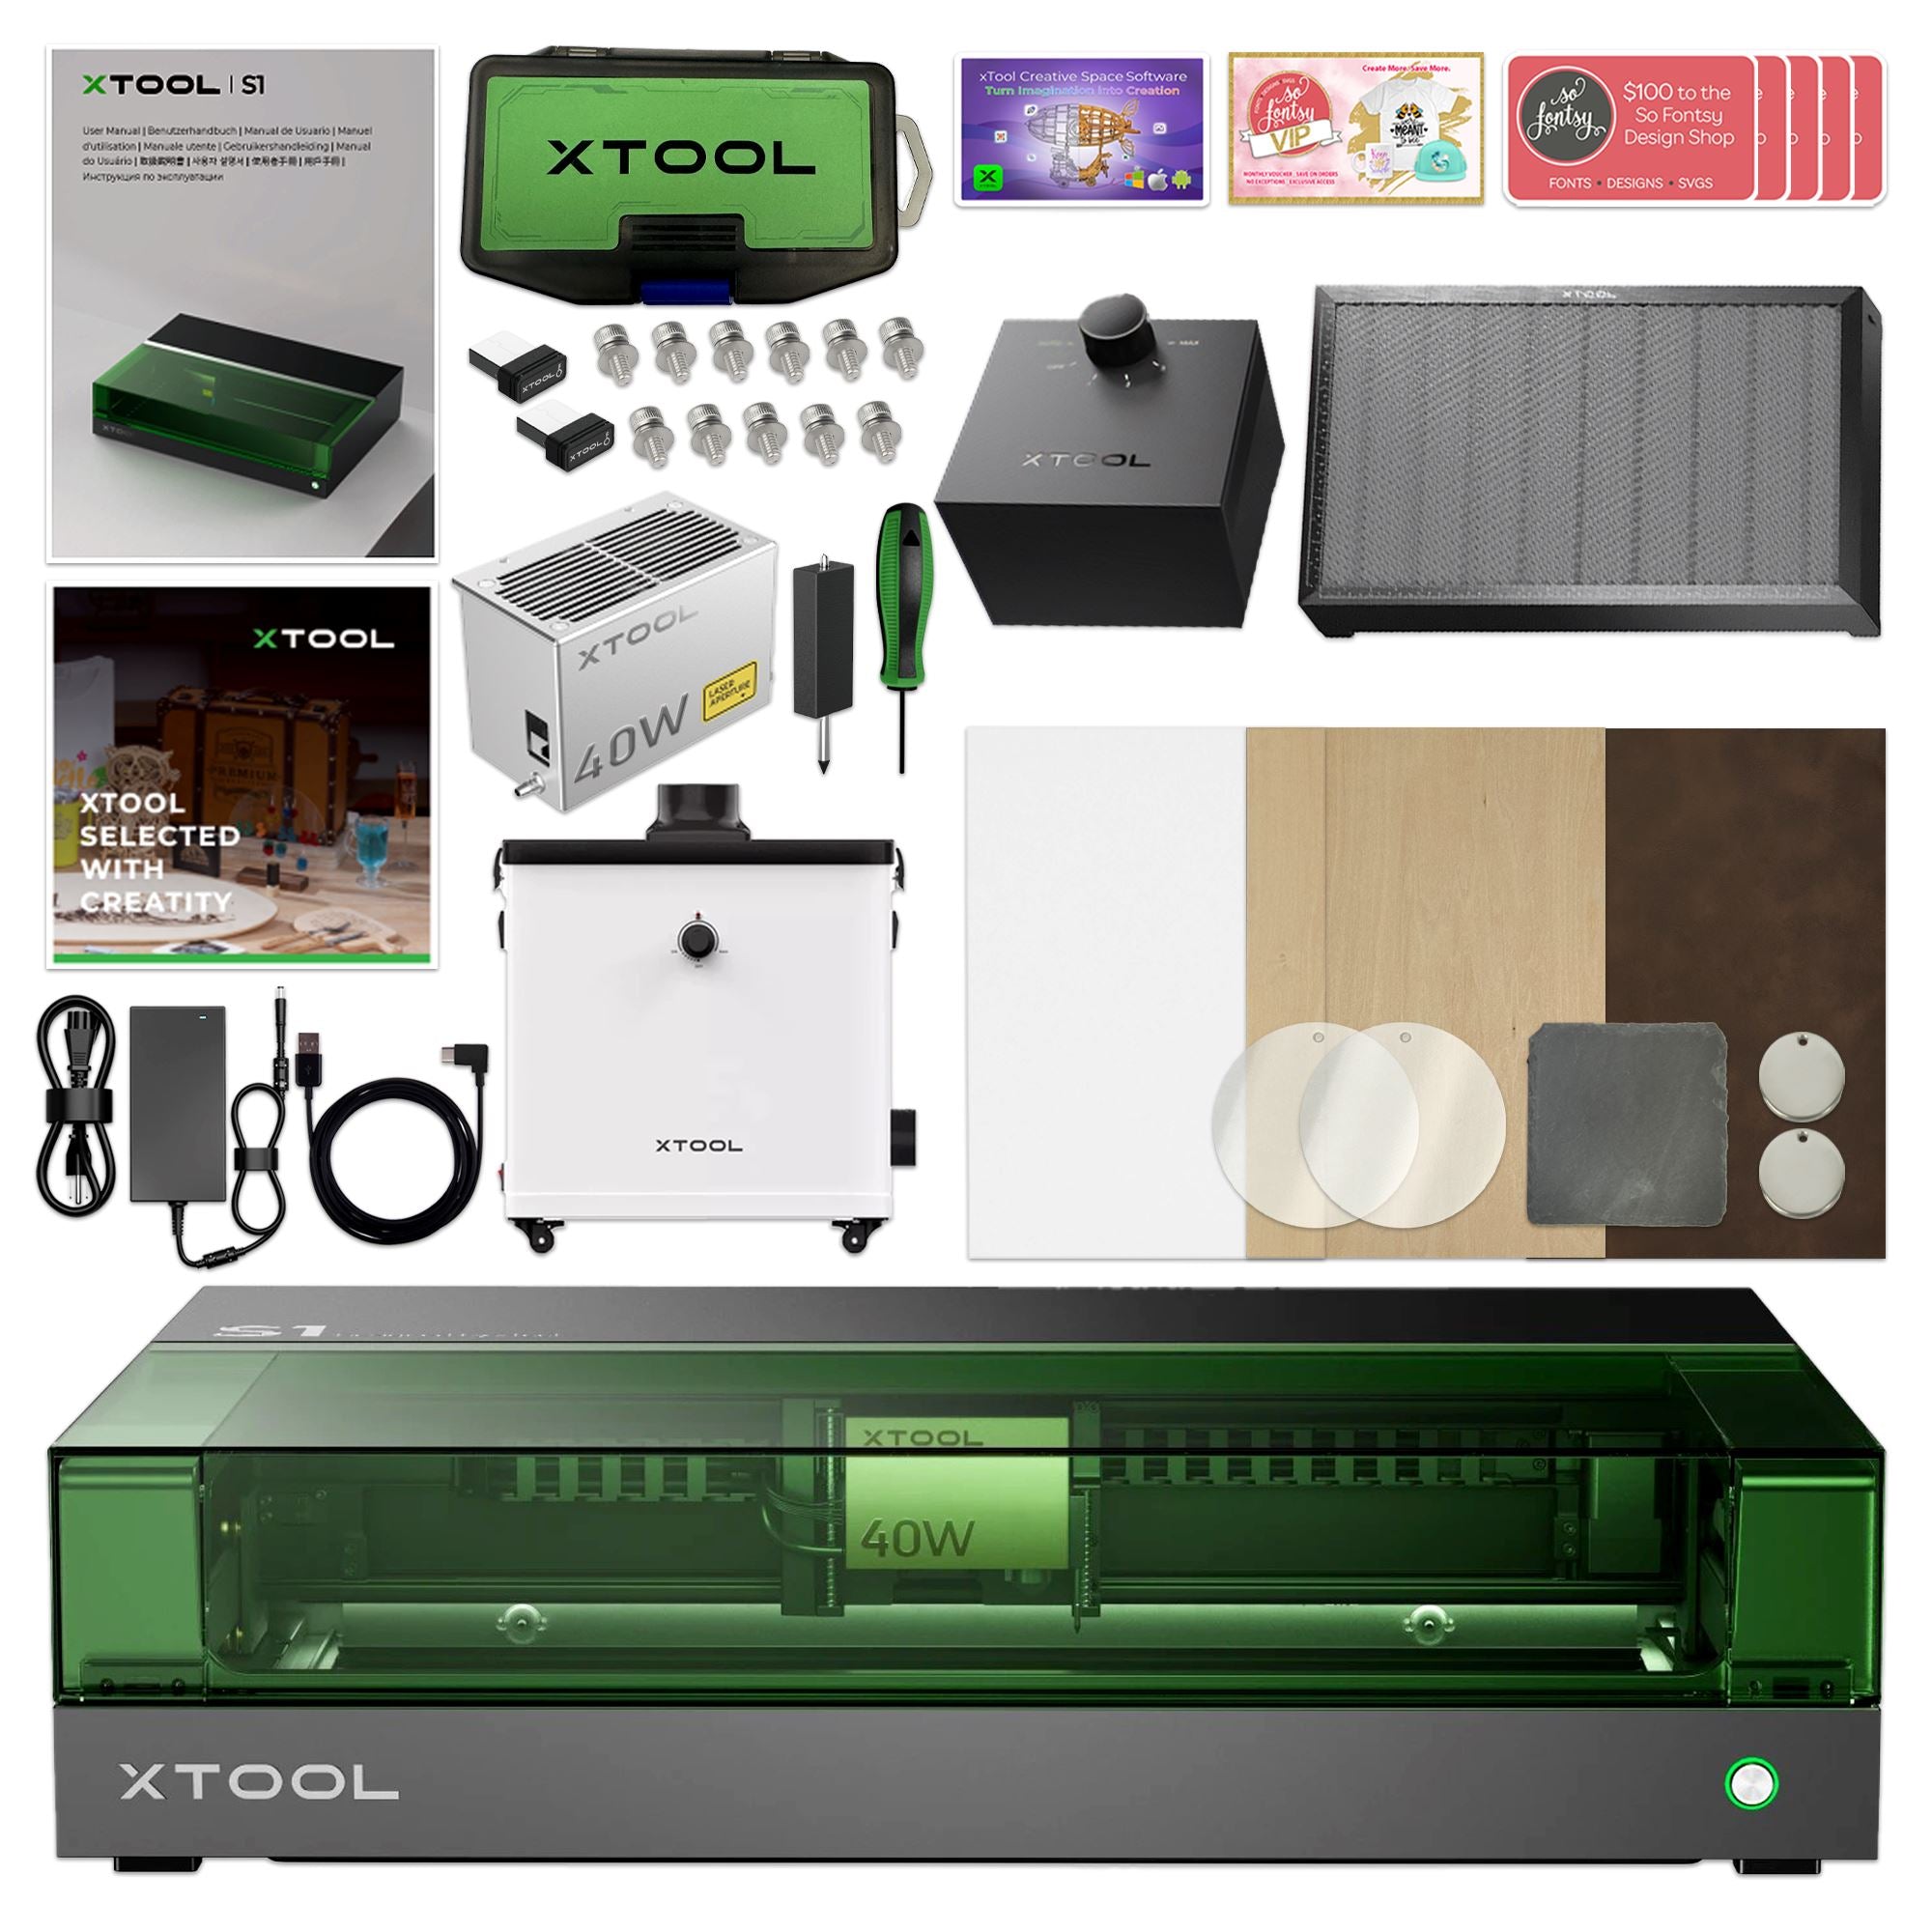 xTool S1 Diode Laser Engraving and Cutting Machine Review, Full Enclosure, 3D Engraving